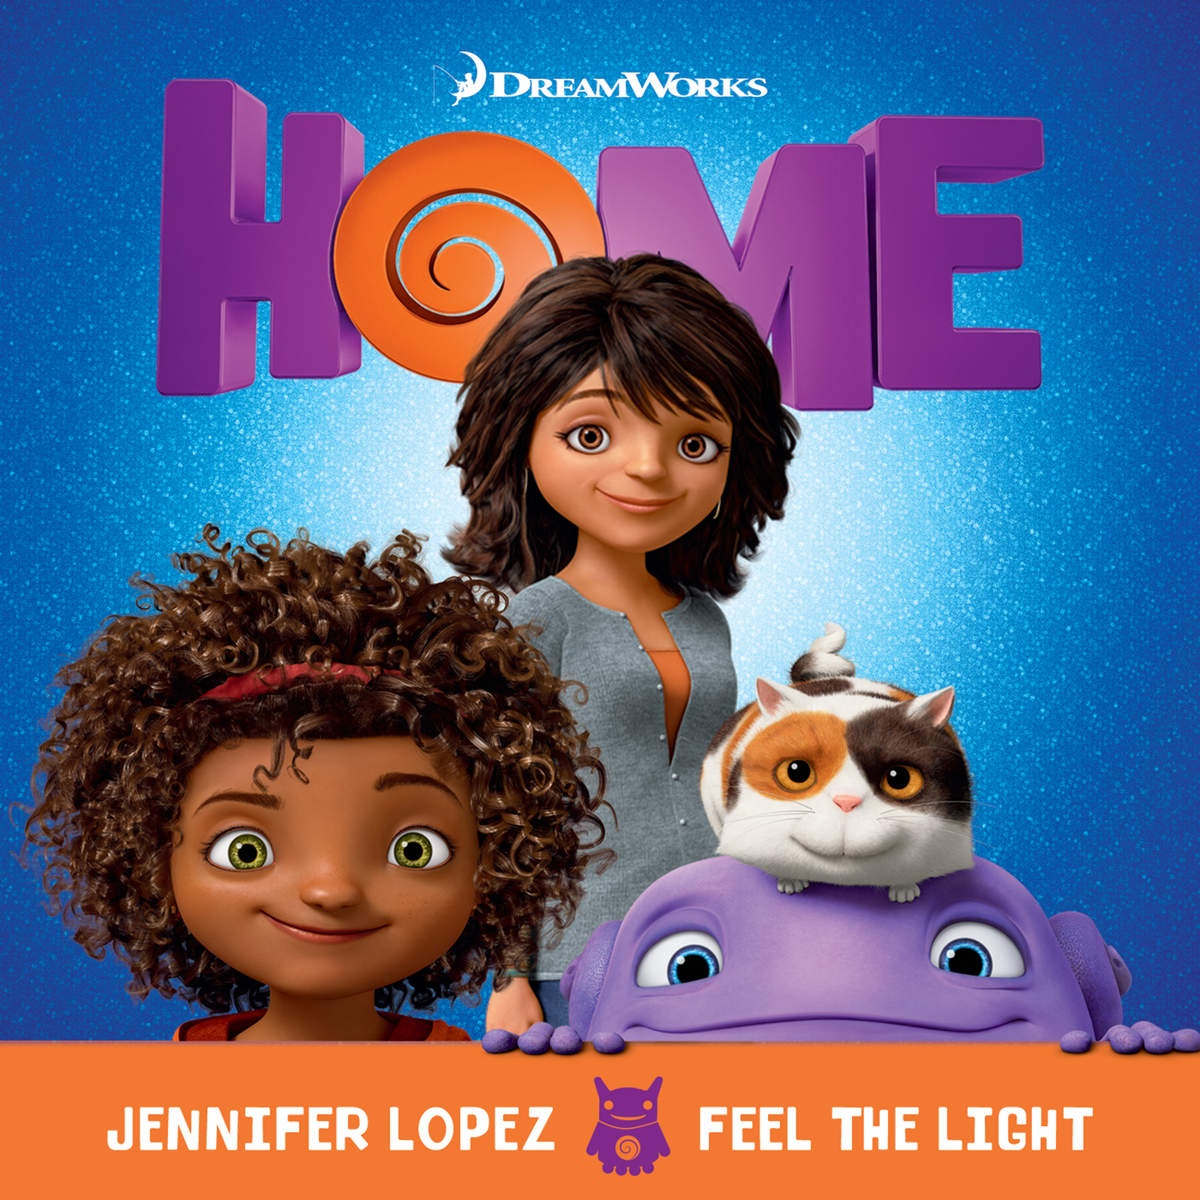 Feel The Light - From The "Home" Soundtrack